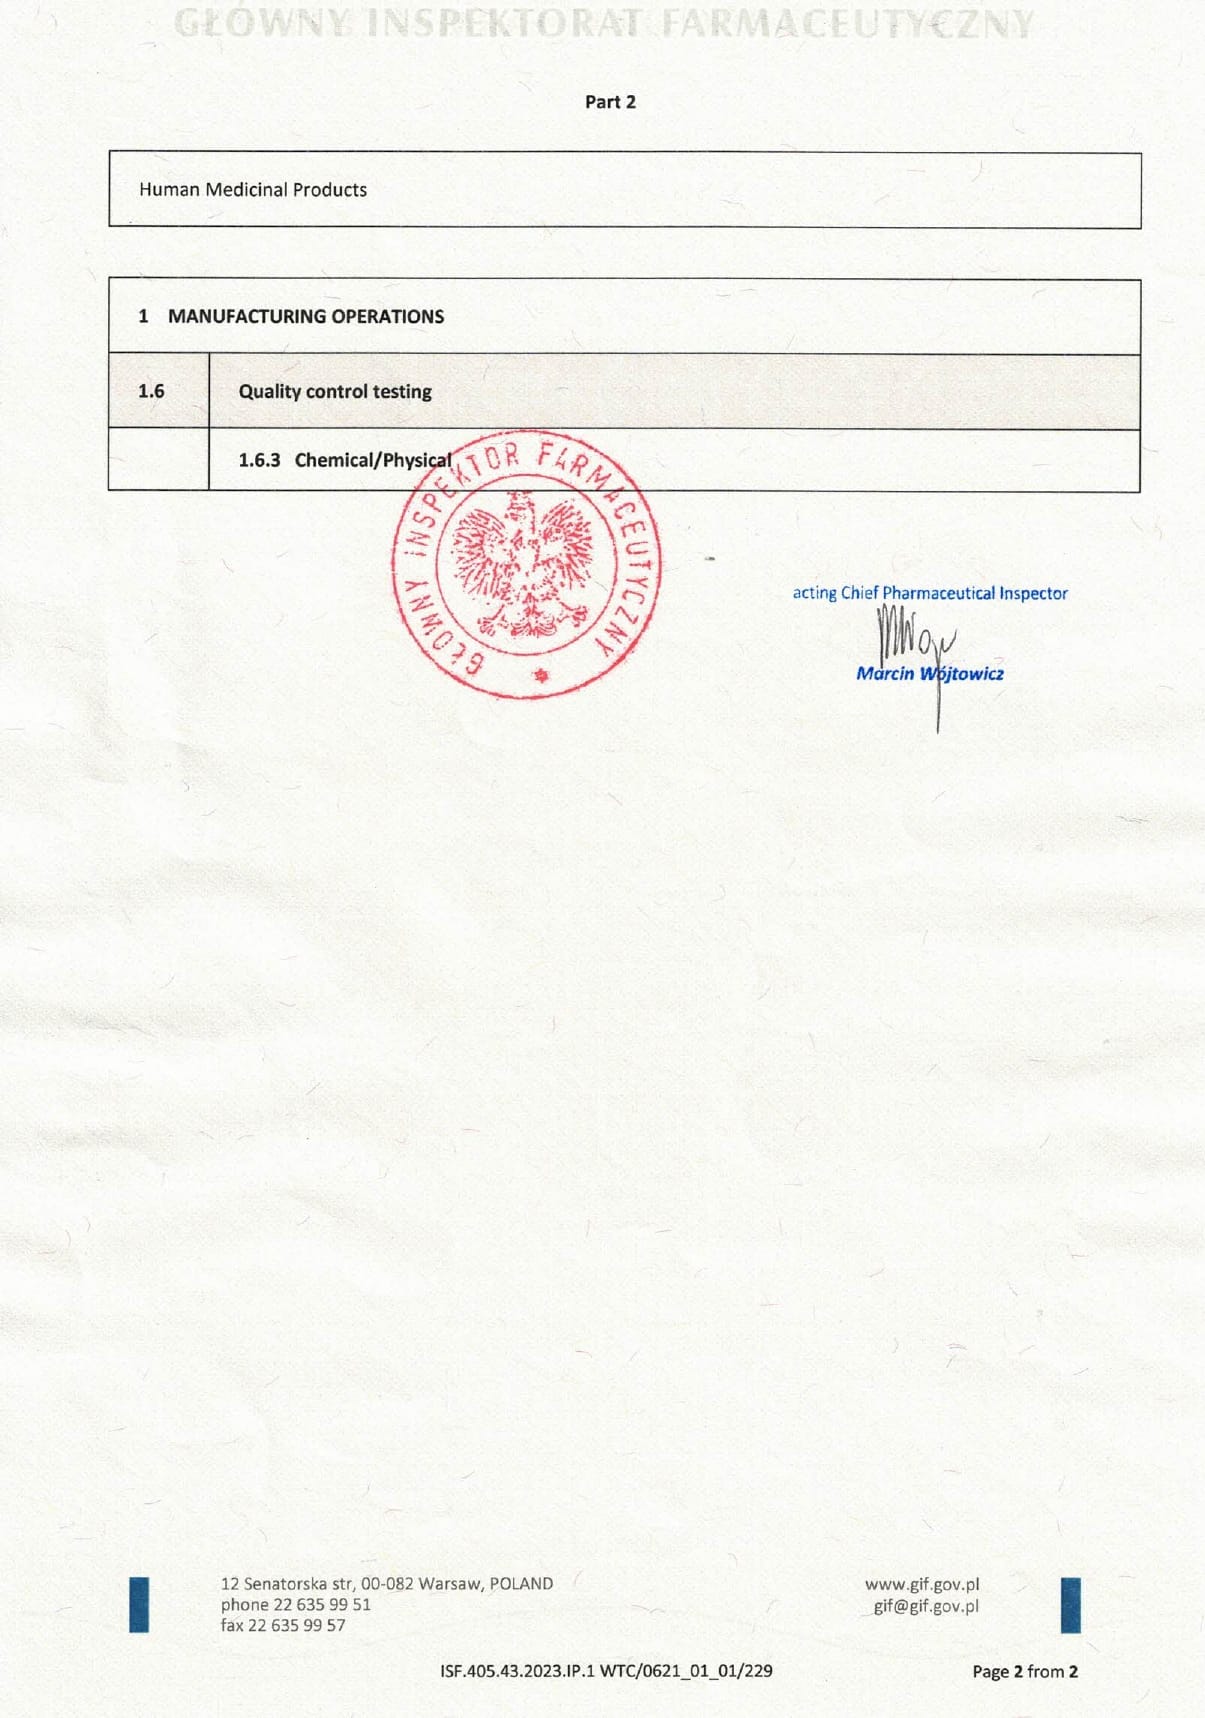 Second page of GMP certificate